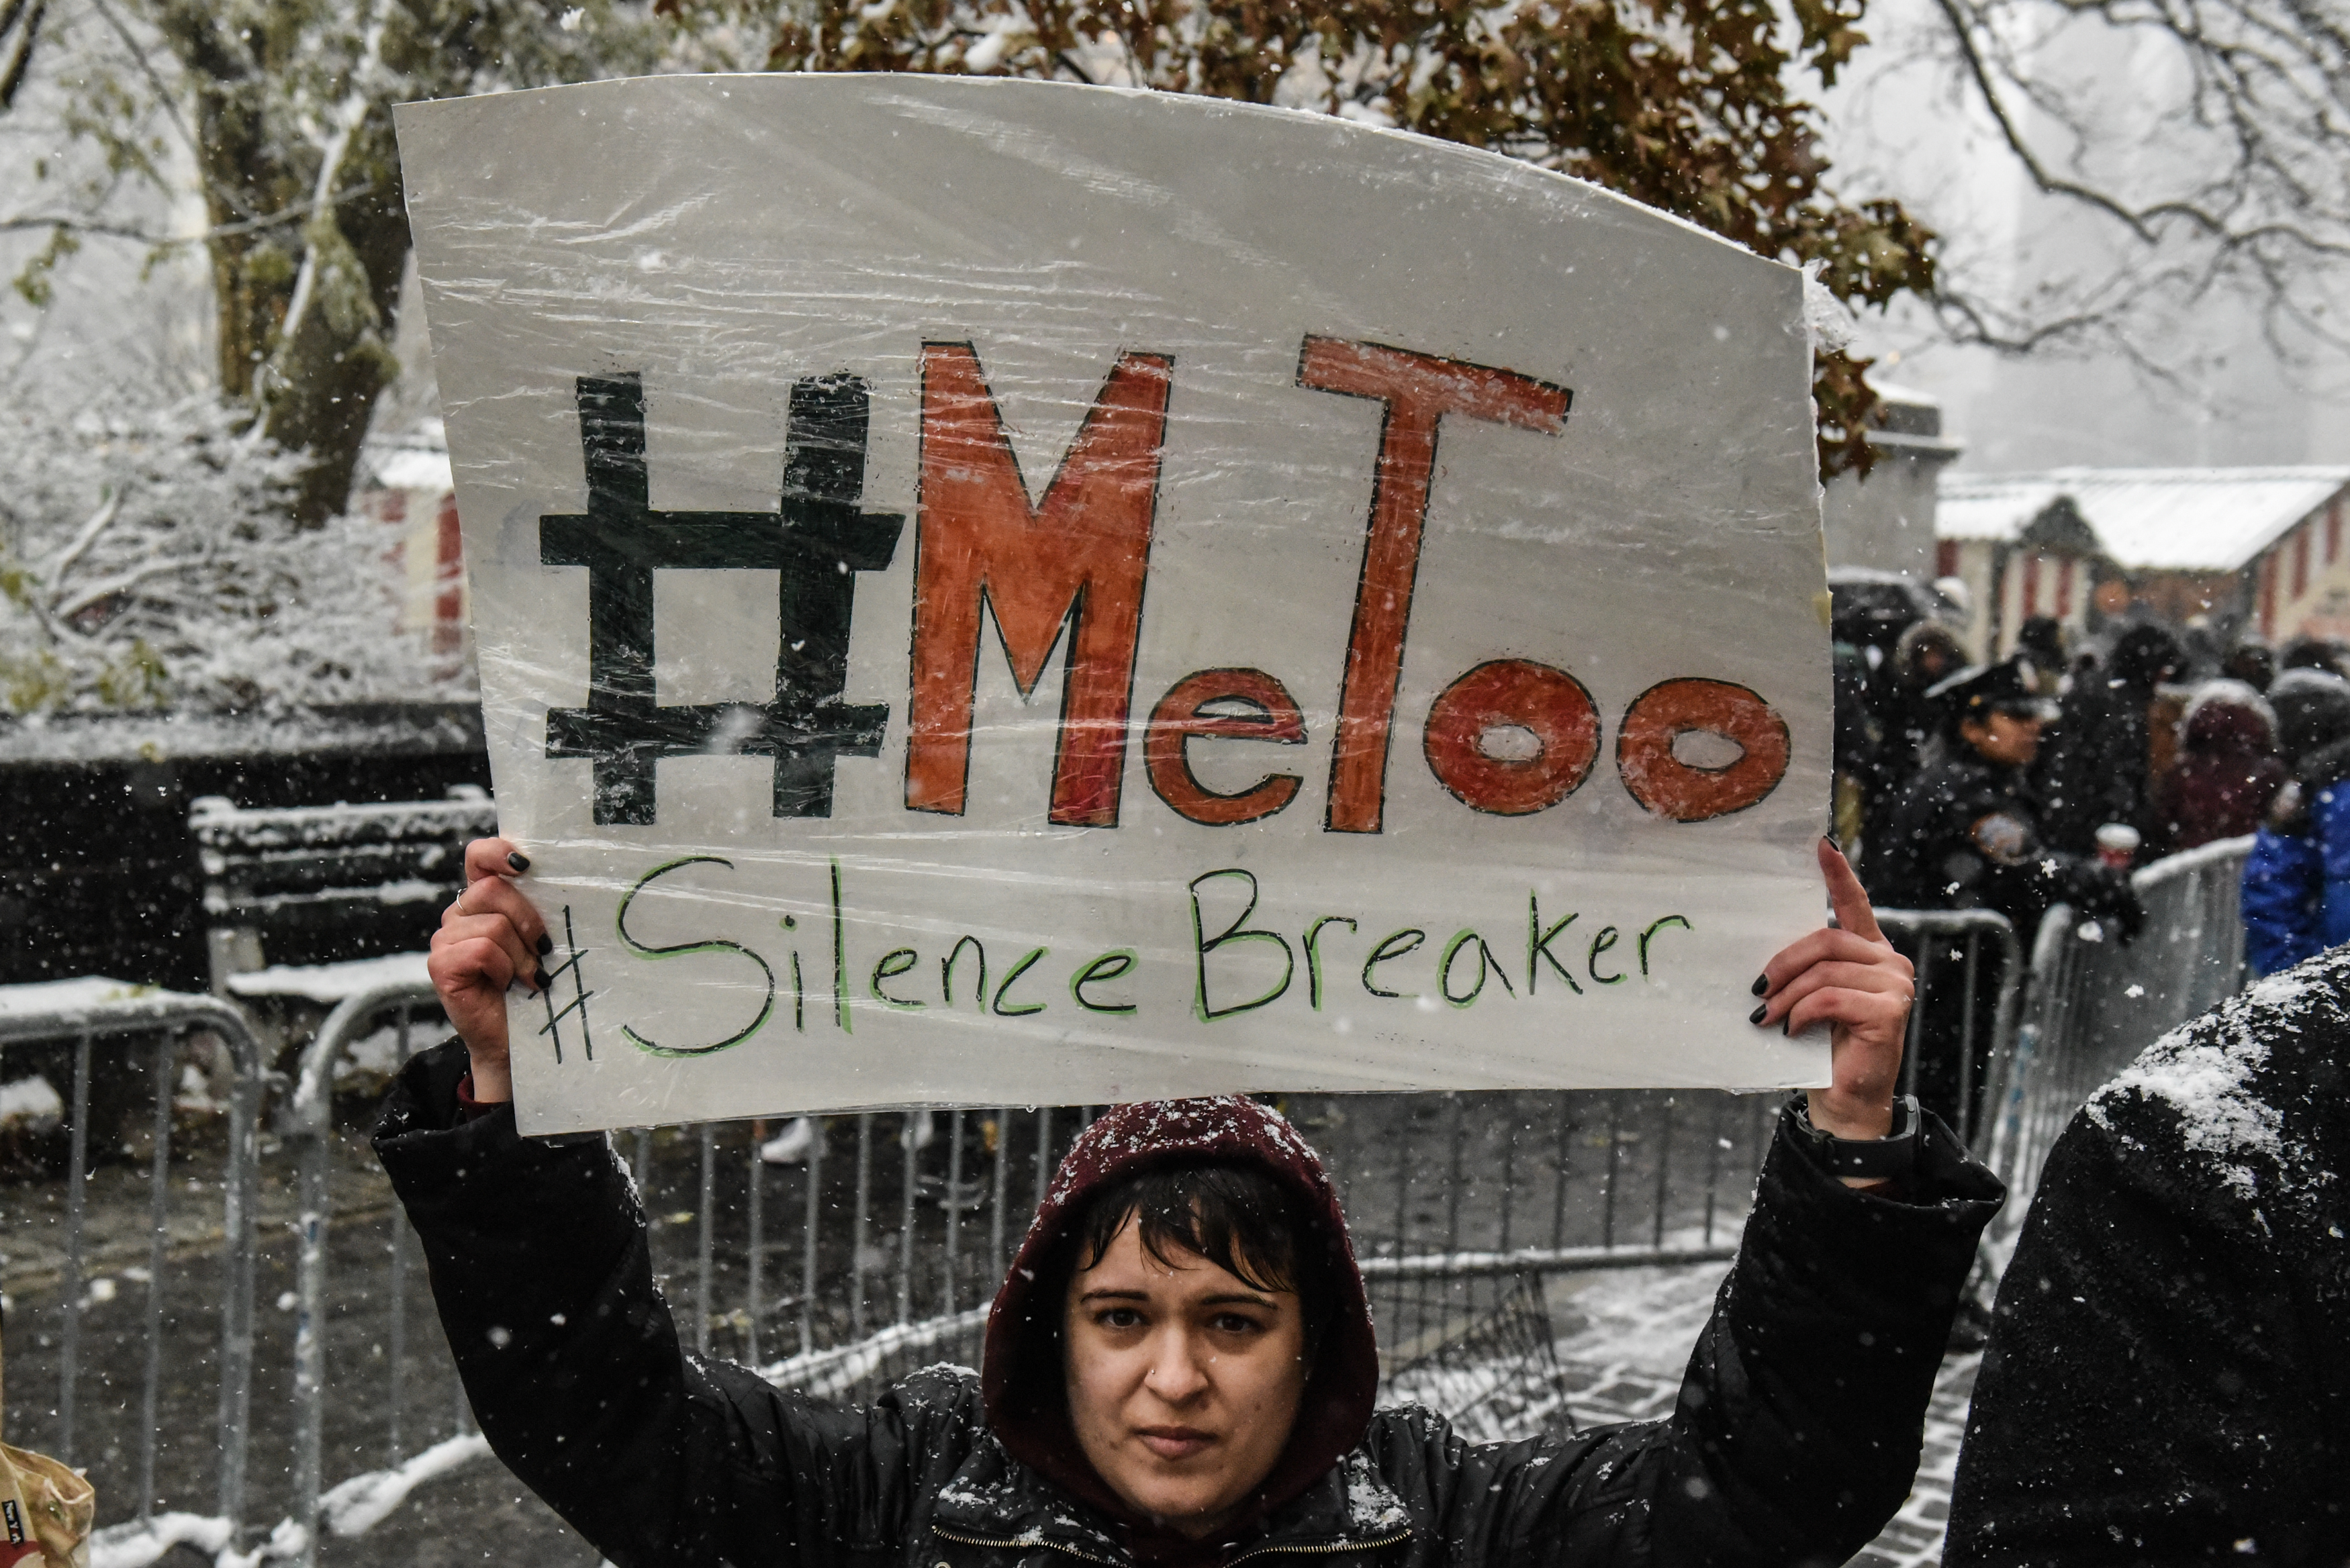 NEW YORK, NY - DECEMBER 09: People carry signs addressing the issue of sexual harassment at a #MeToo rally outside of Trump International Hotel on December 9, 2017 in New York City. (Photo by Stephanie Keith/Getty Images)